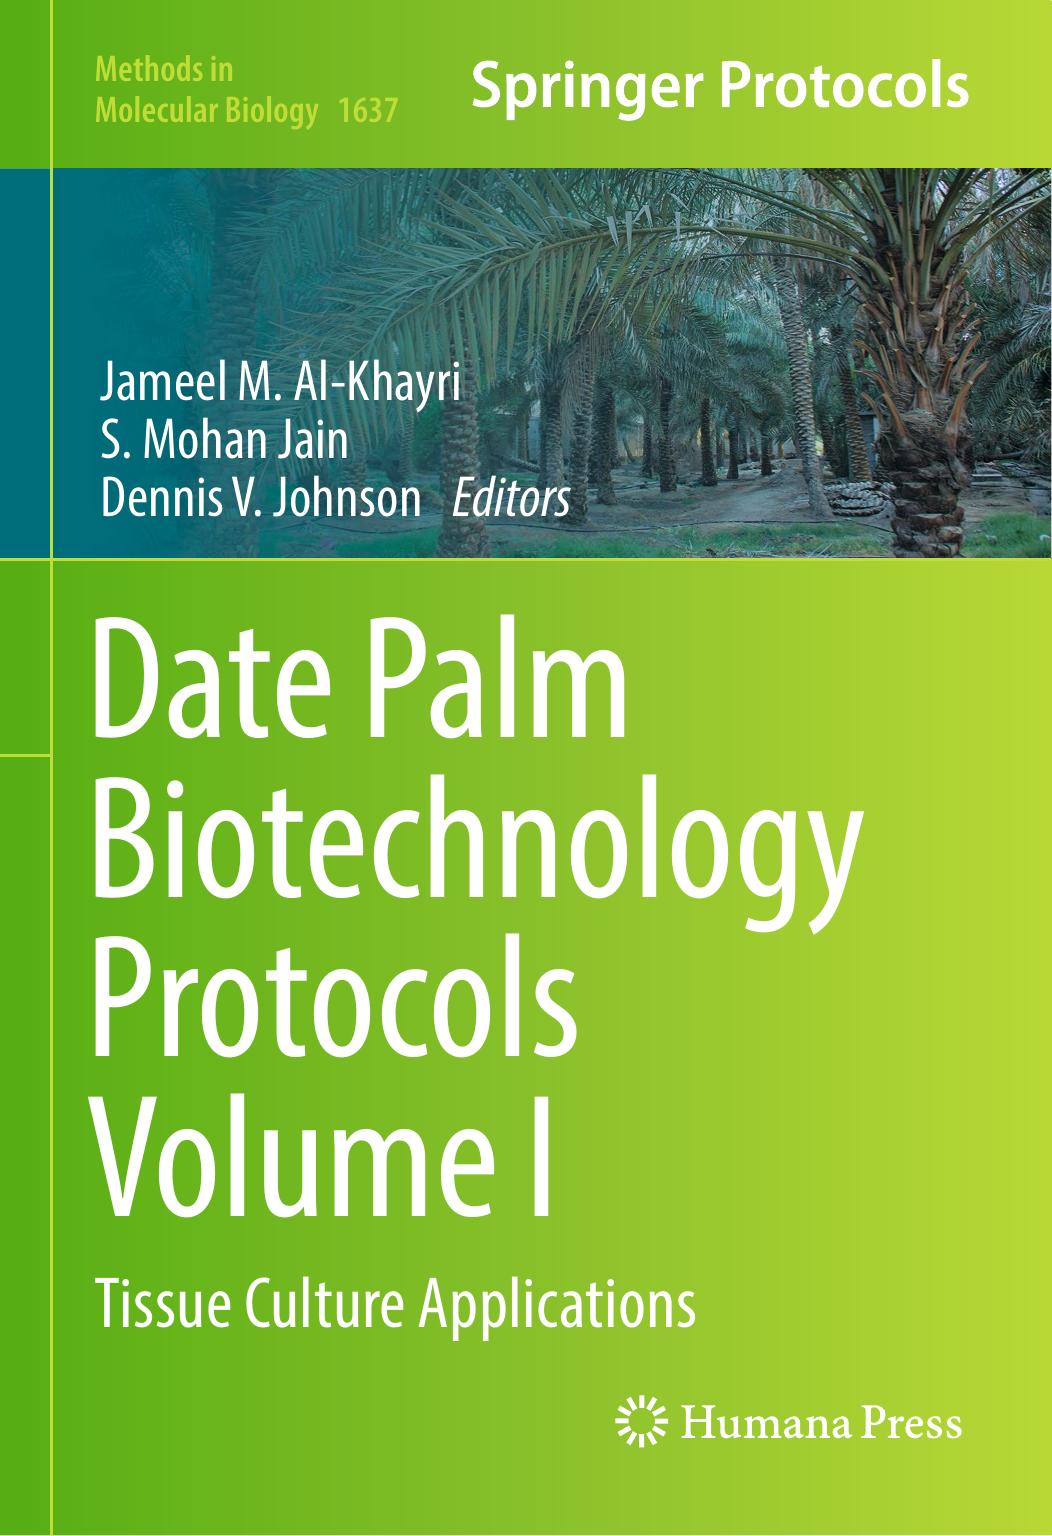 Date palm biotechnology protocols. Volume I, Tissue culture applications 2017